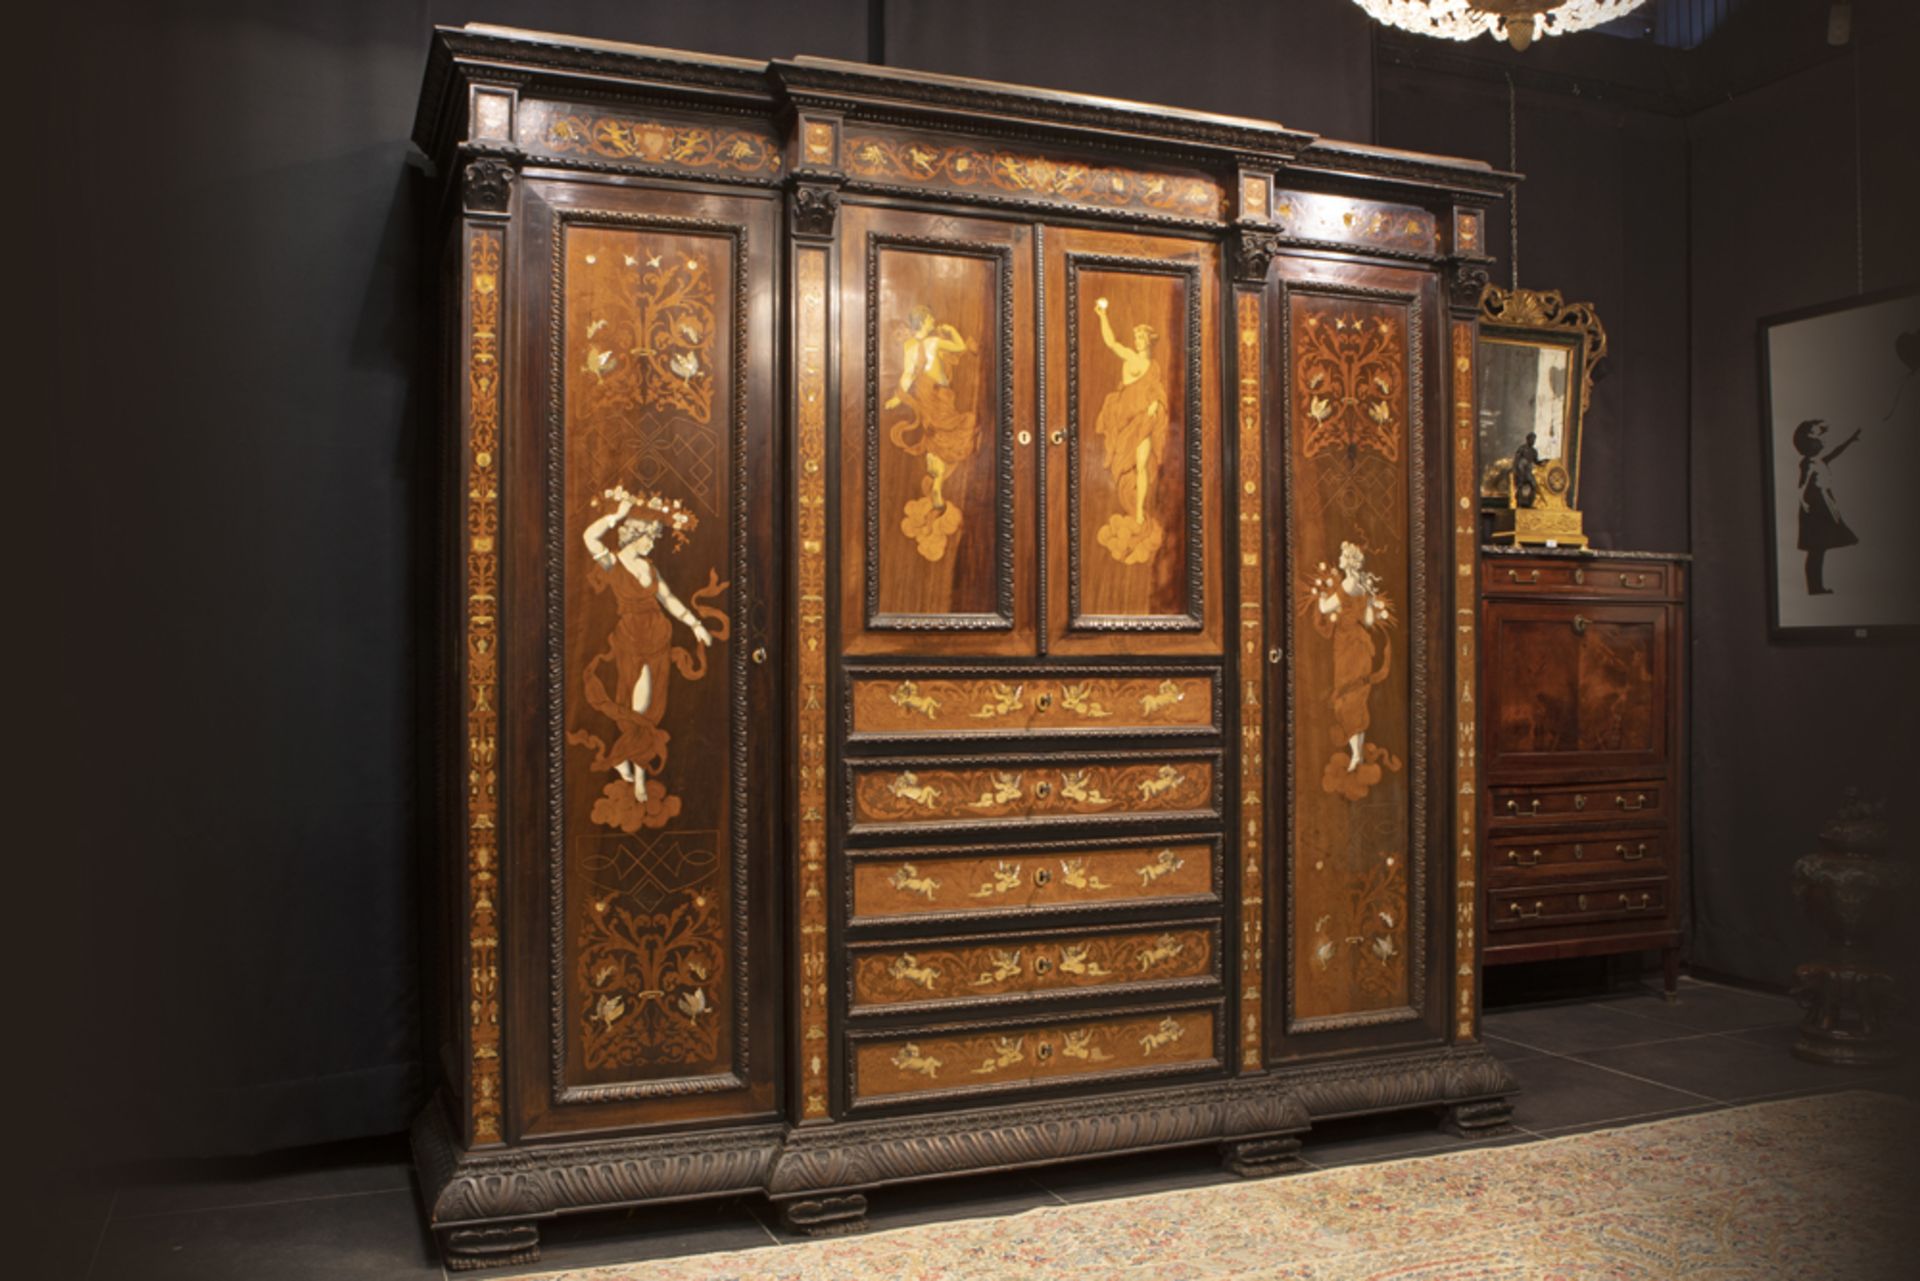 quite exceptional, antique Italian armoire (presumably from Tuscany) in walnut and rose-wood adorned